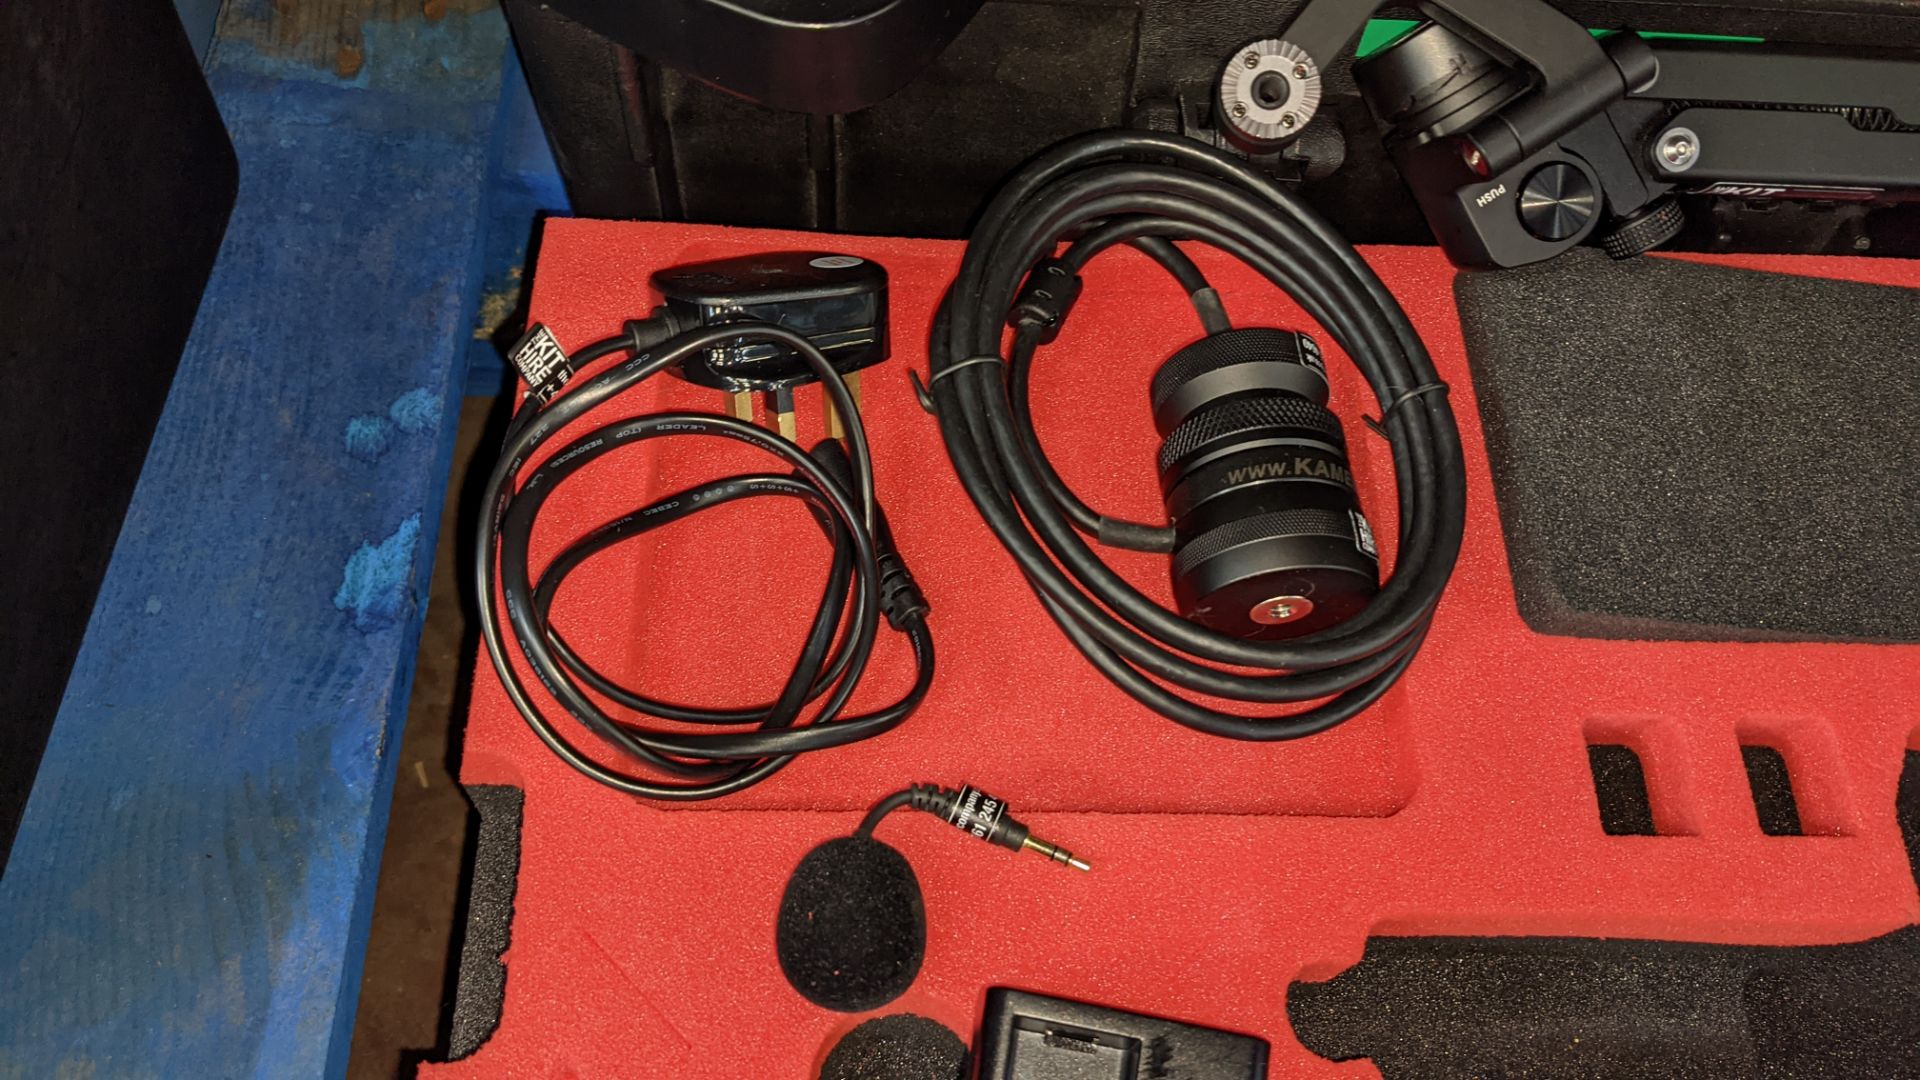 DJI Osmo X3 kit comprising hand-held gimbal plus wide variety of ancillaries for use with same, as d - Image 12 of 20